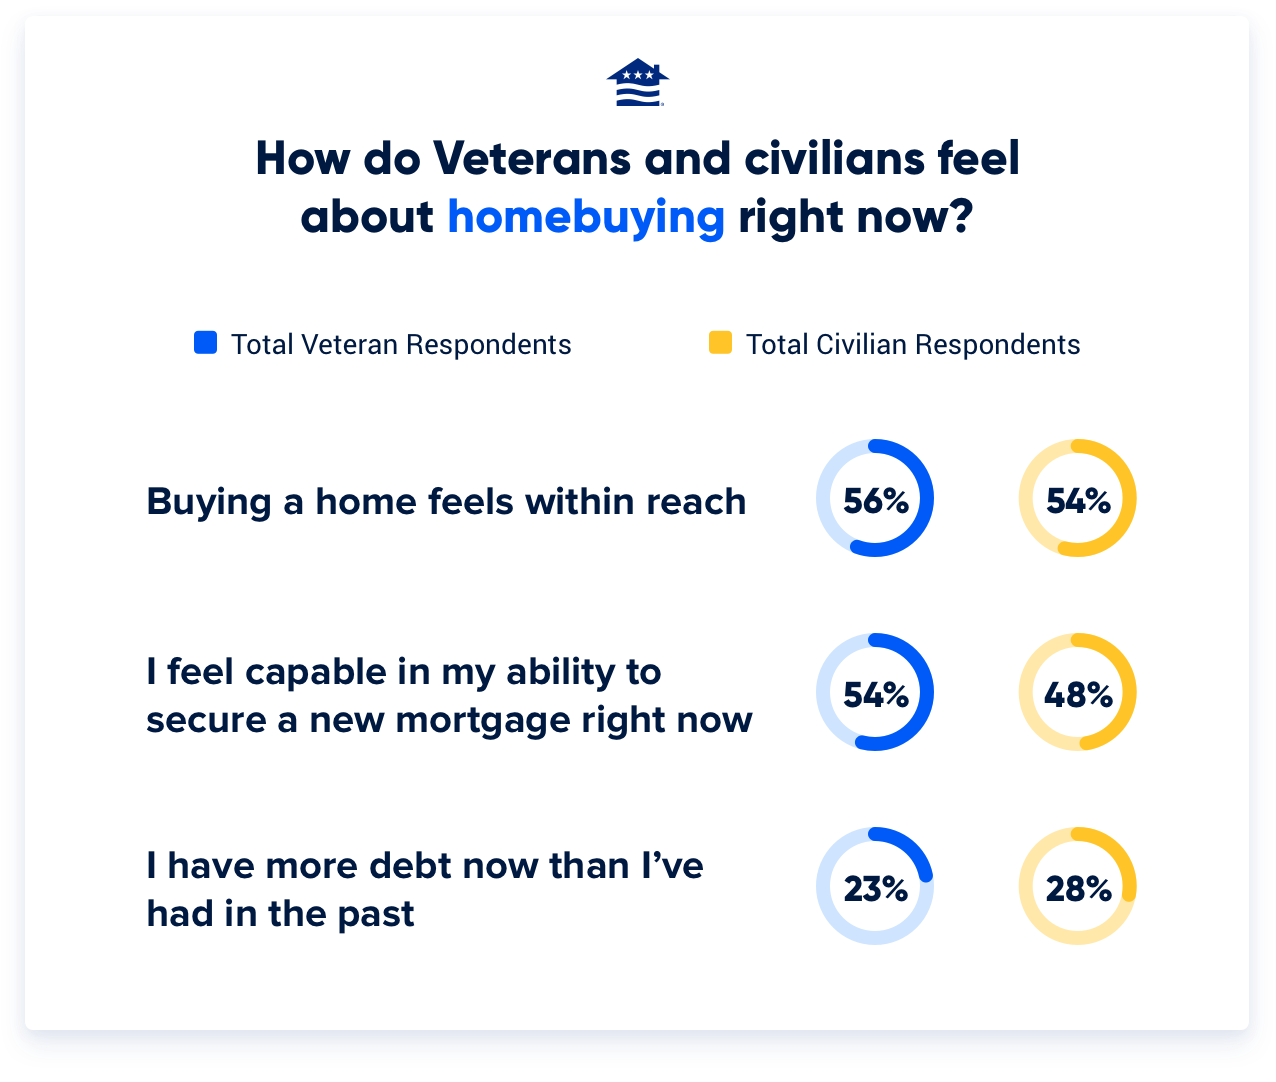 Veterans (Q3) Civilians (Q3) Buying a home feels within reach 56% 54% I feel capable in my ability to secure a new mortgage right now 54% 48% I have more debt now than I’ve had in the past 23% 28%